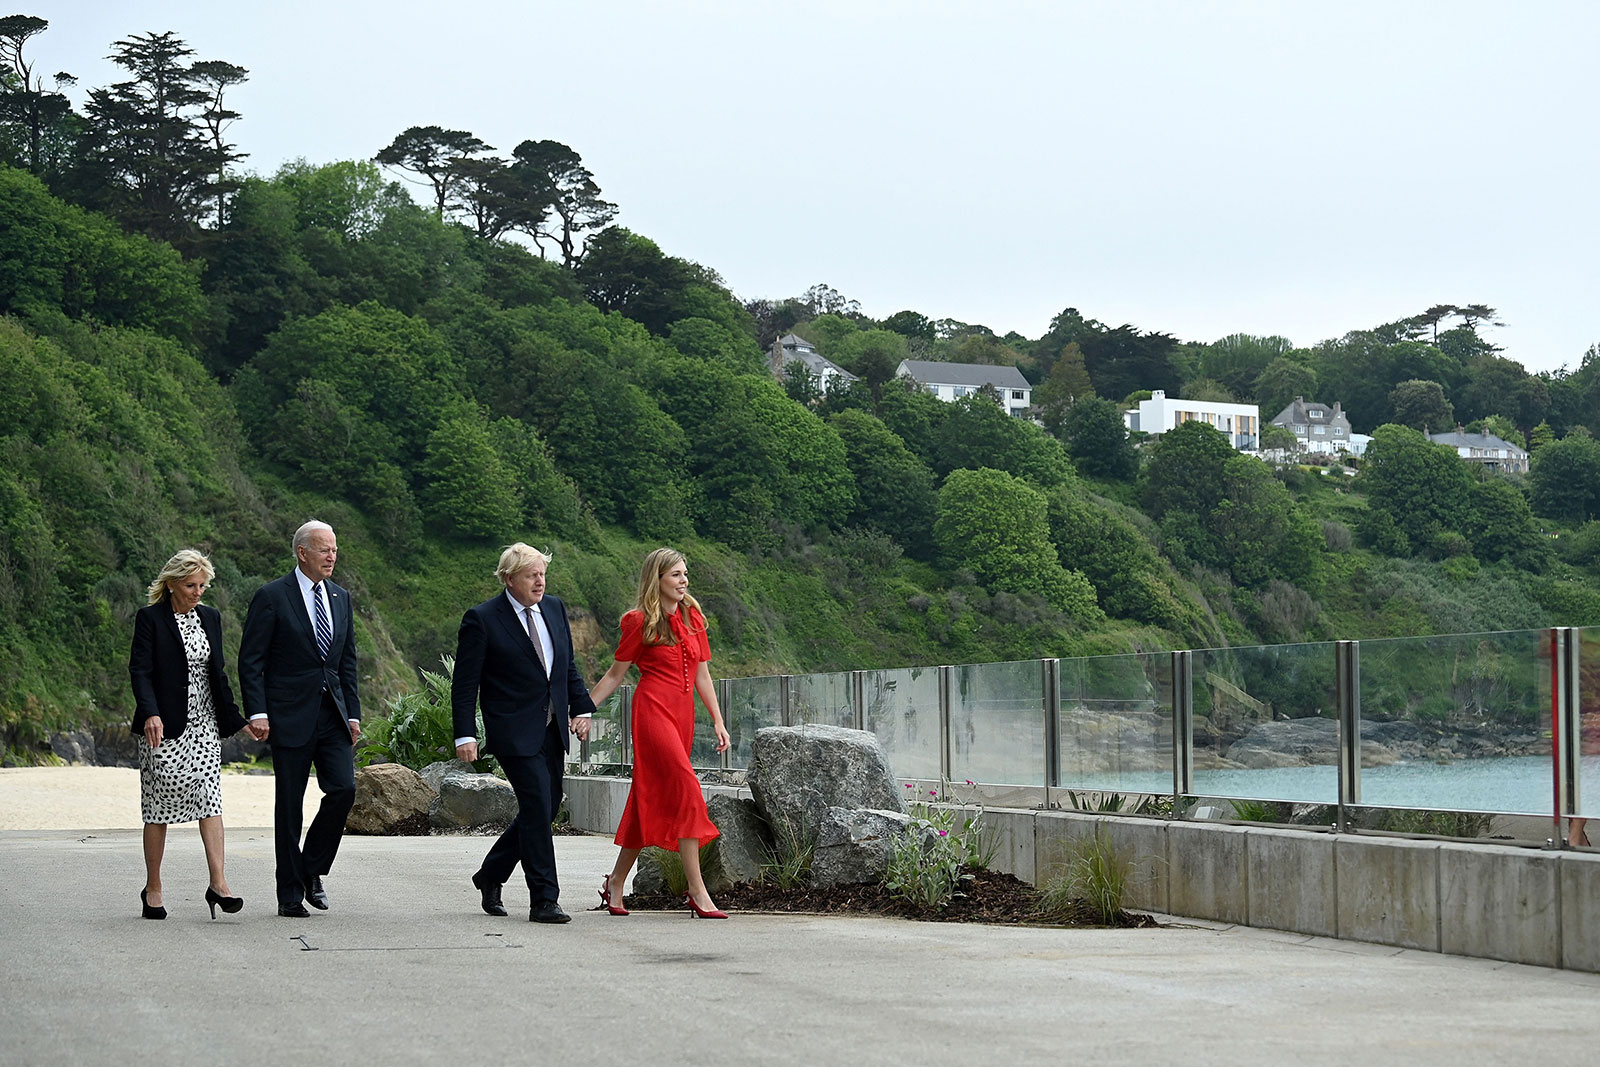 Britain's Prime Minister Boris Johnson, his wife Carrie Johnson and US President Joe Biden with first lady Jill Biden walk outside Carbis Bay, Cornwall, on Thursday, June 10.